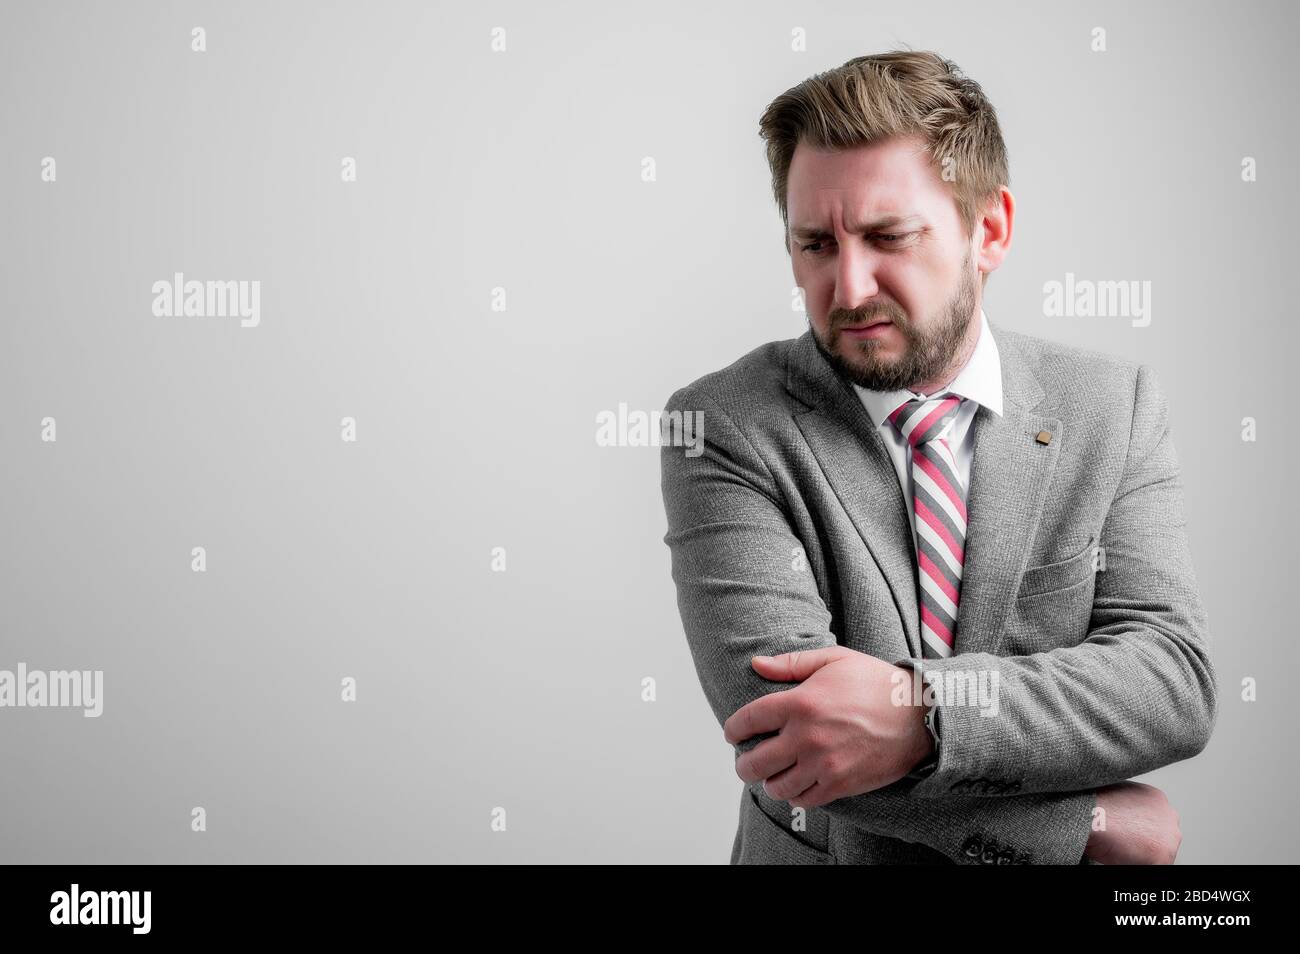 Portrait of business man wearing business clothes gesturing elbow ache isolated on grey background with copy space advertising area Stock Photo